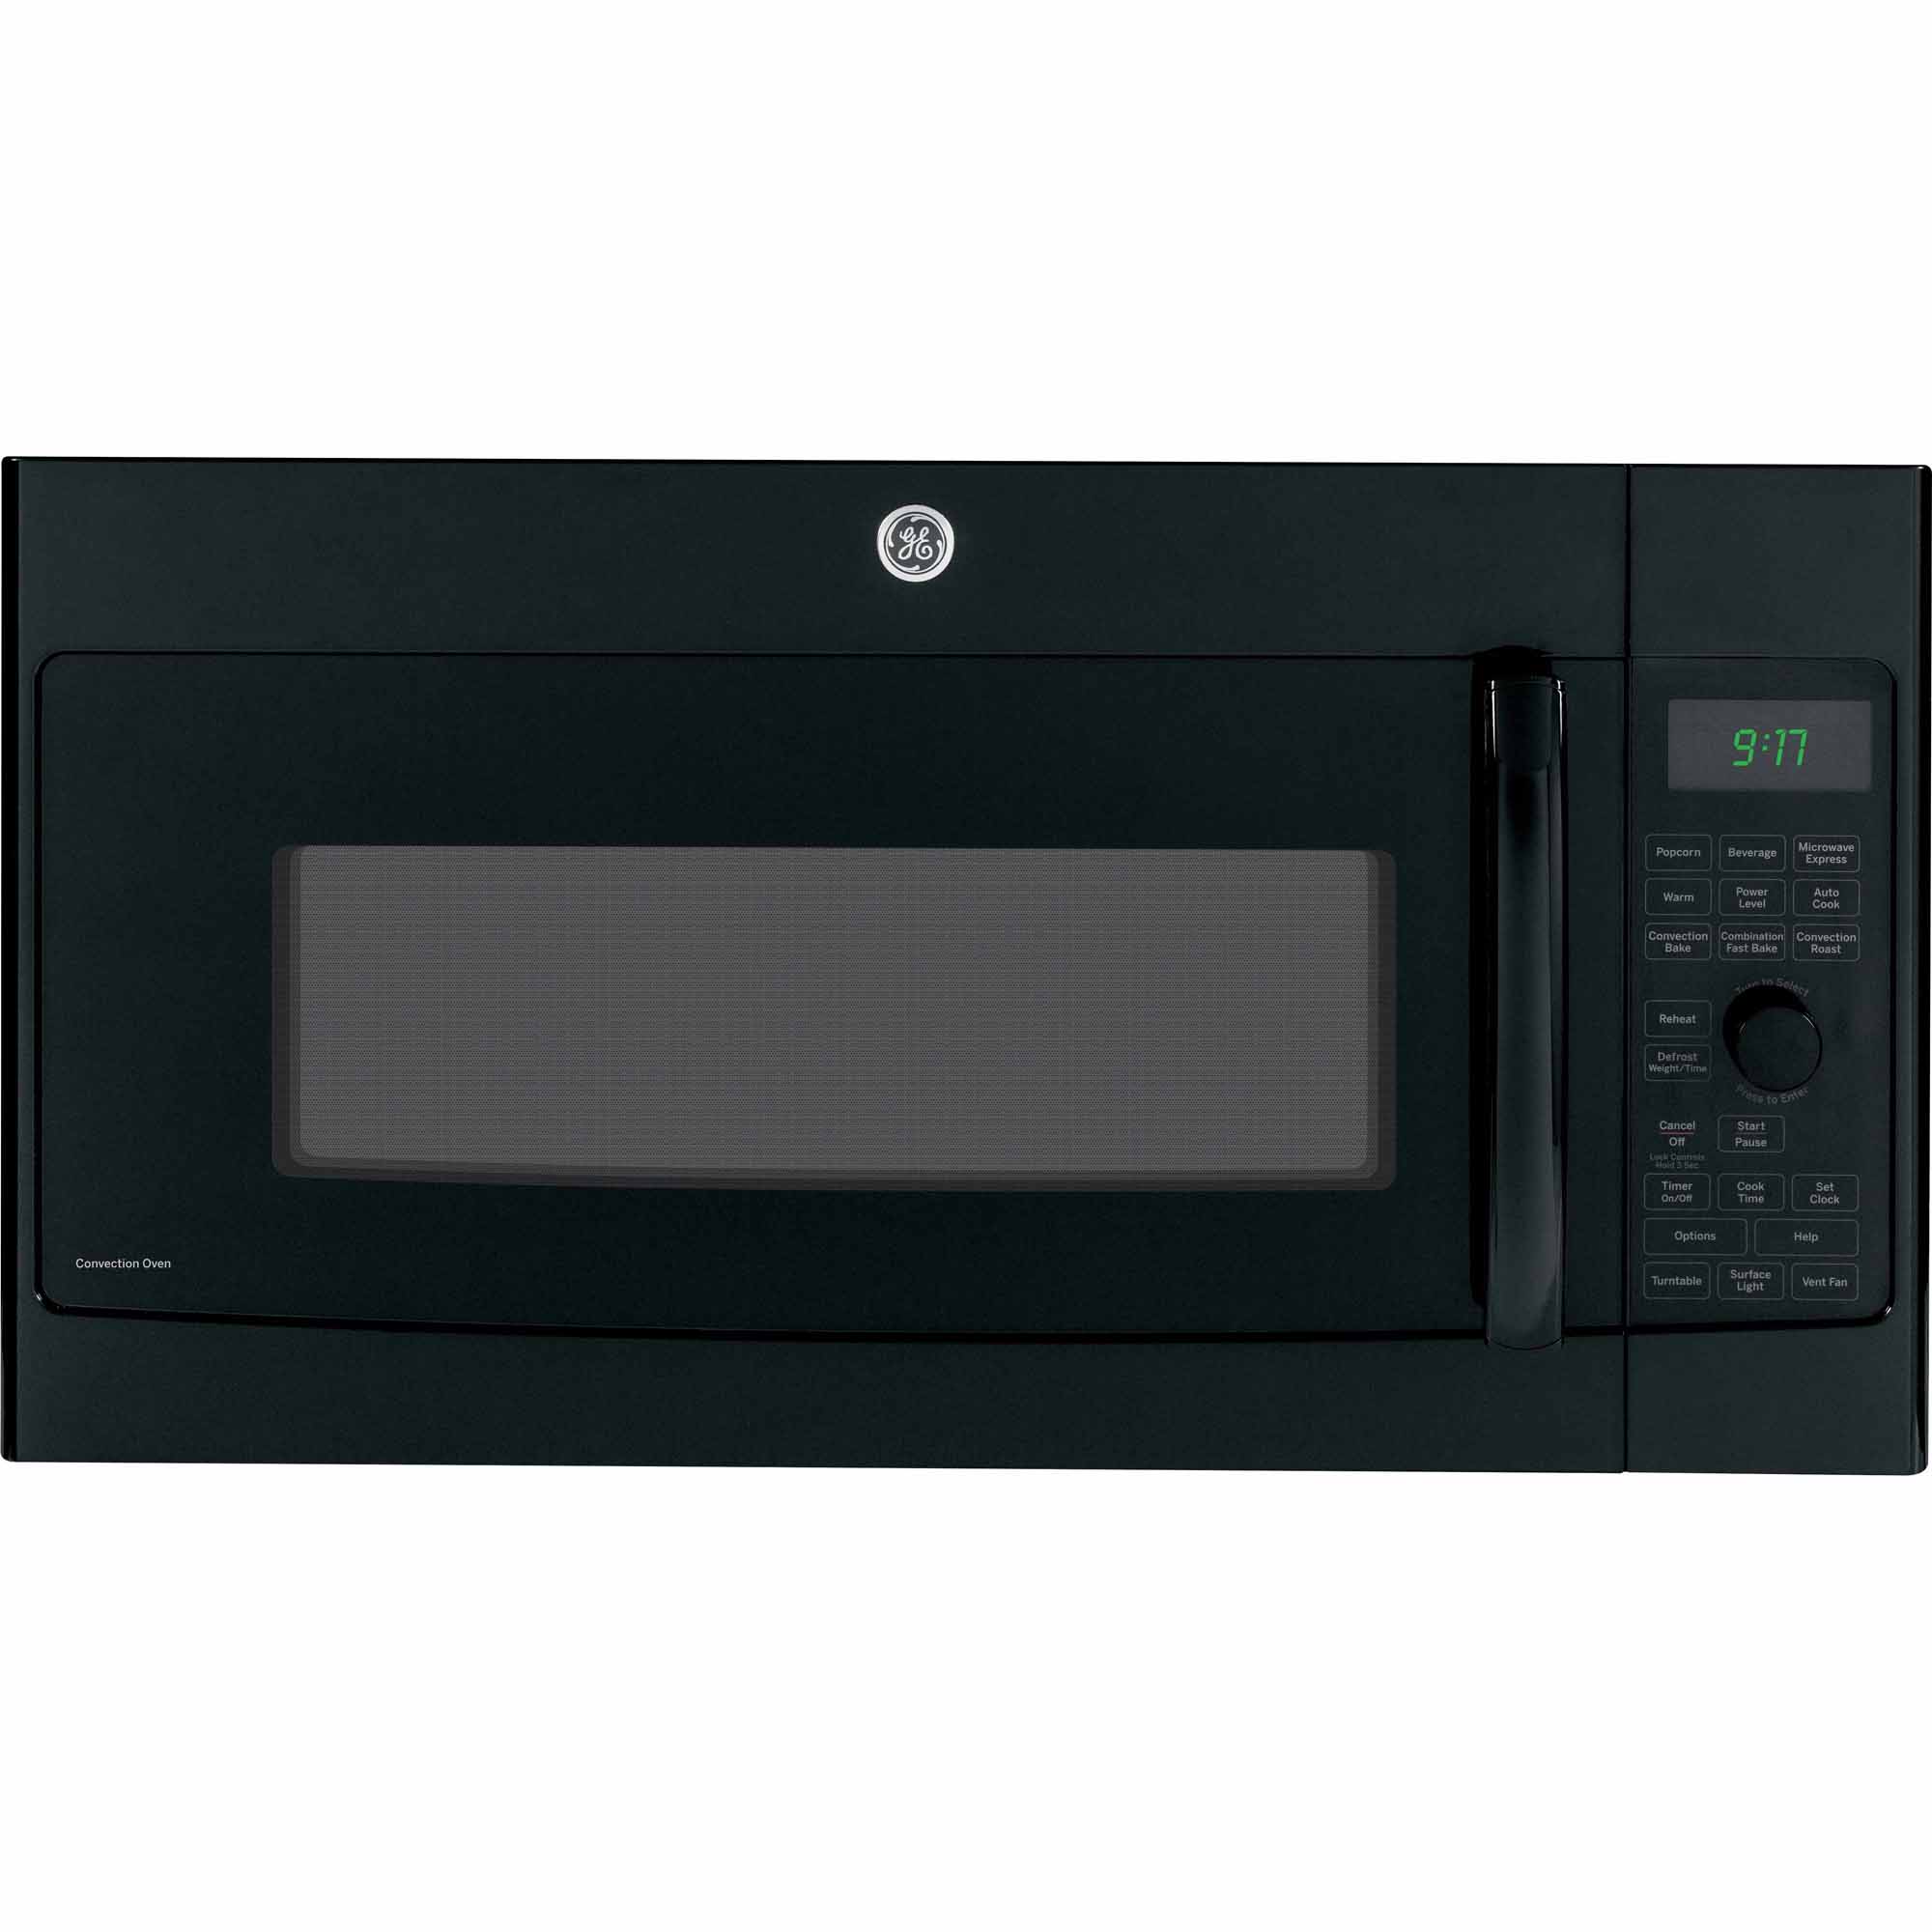 GE Profile Series PVM9179DFBB 1.7 cu. ft. Over-the-Range Microwave Oven